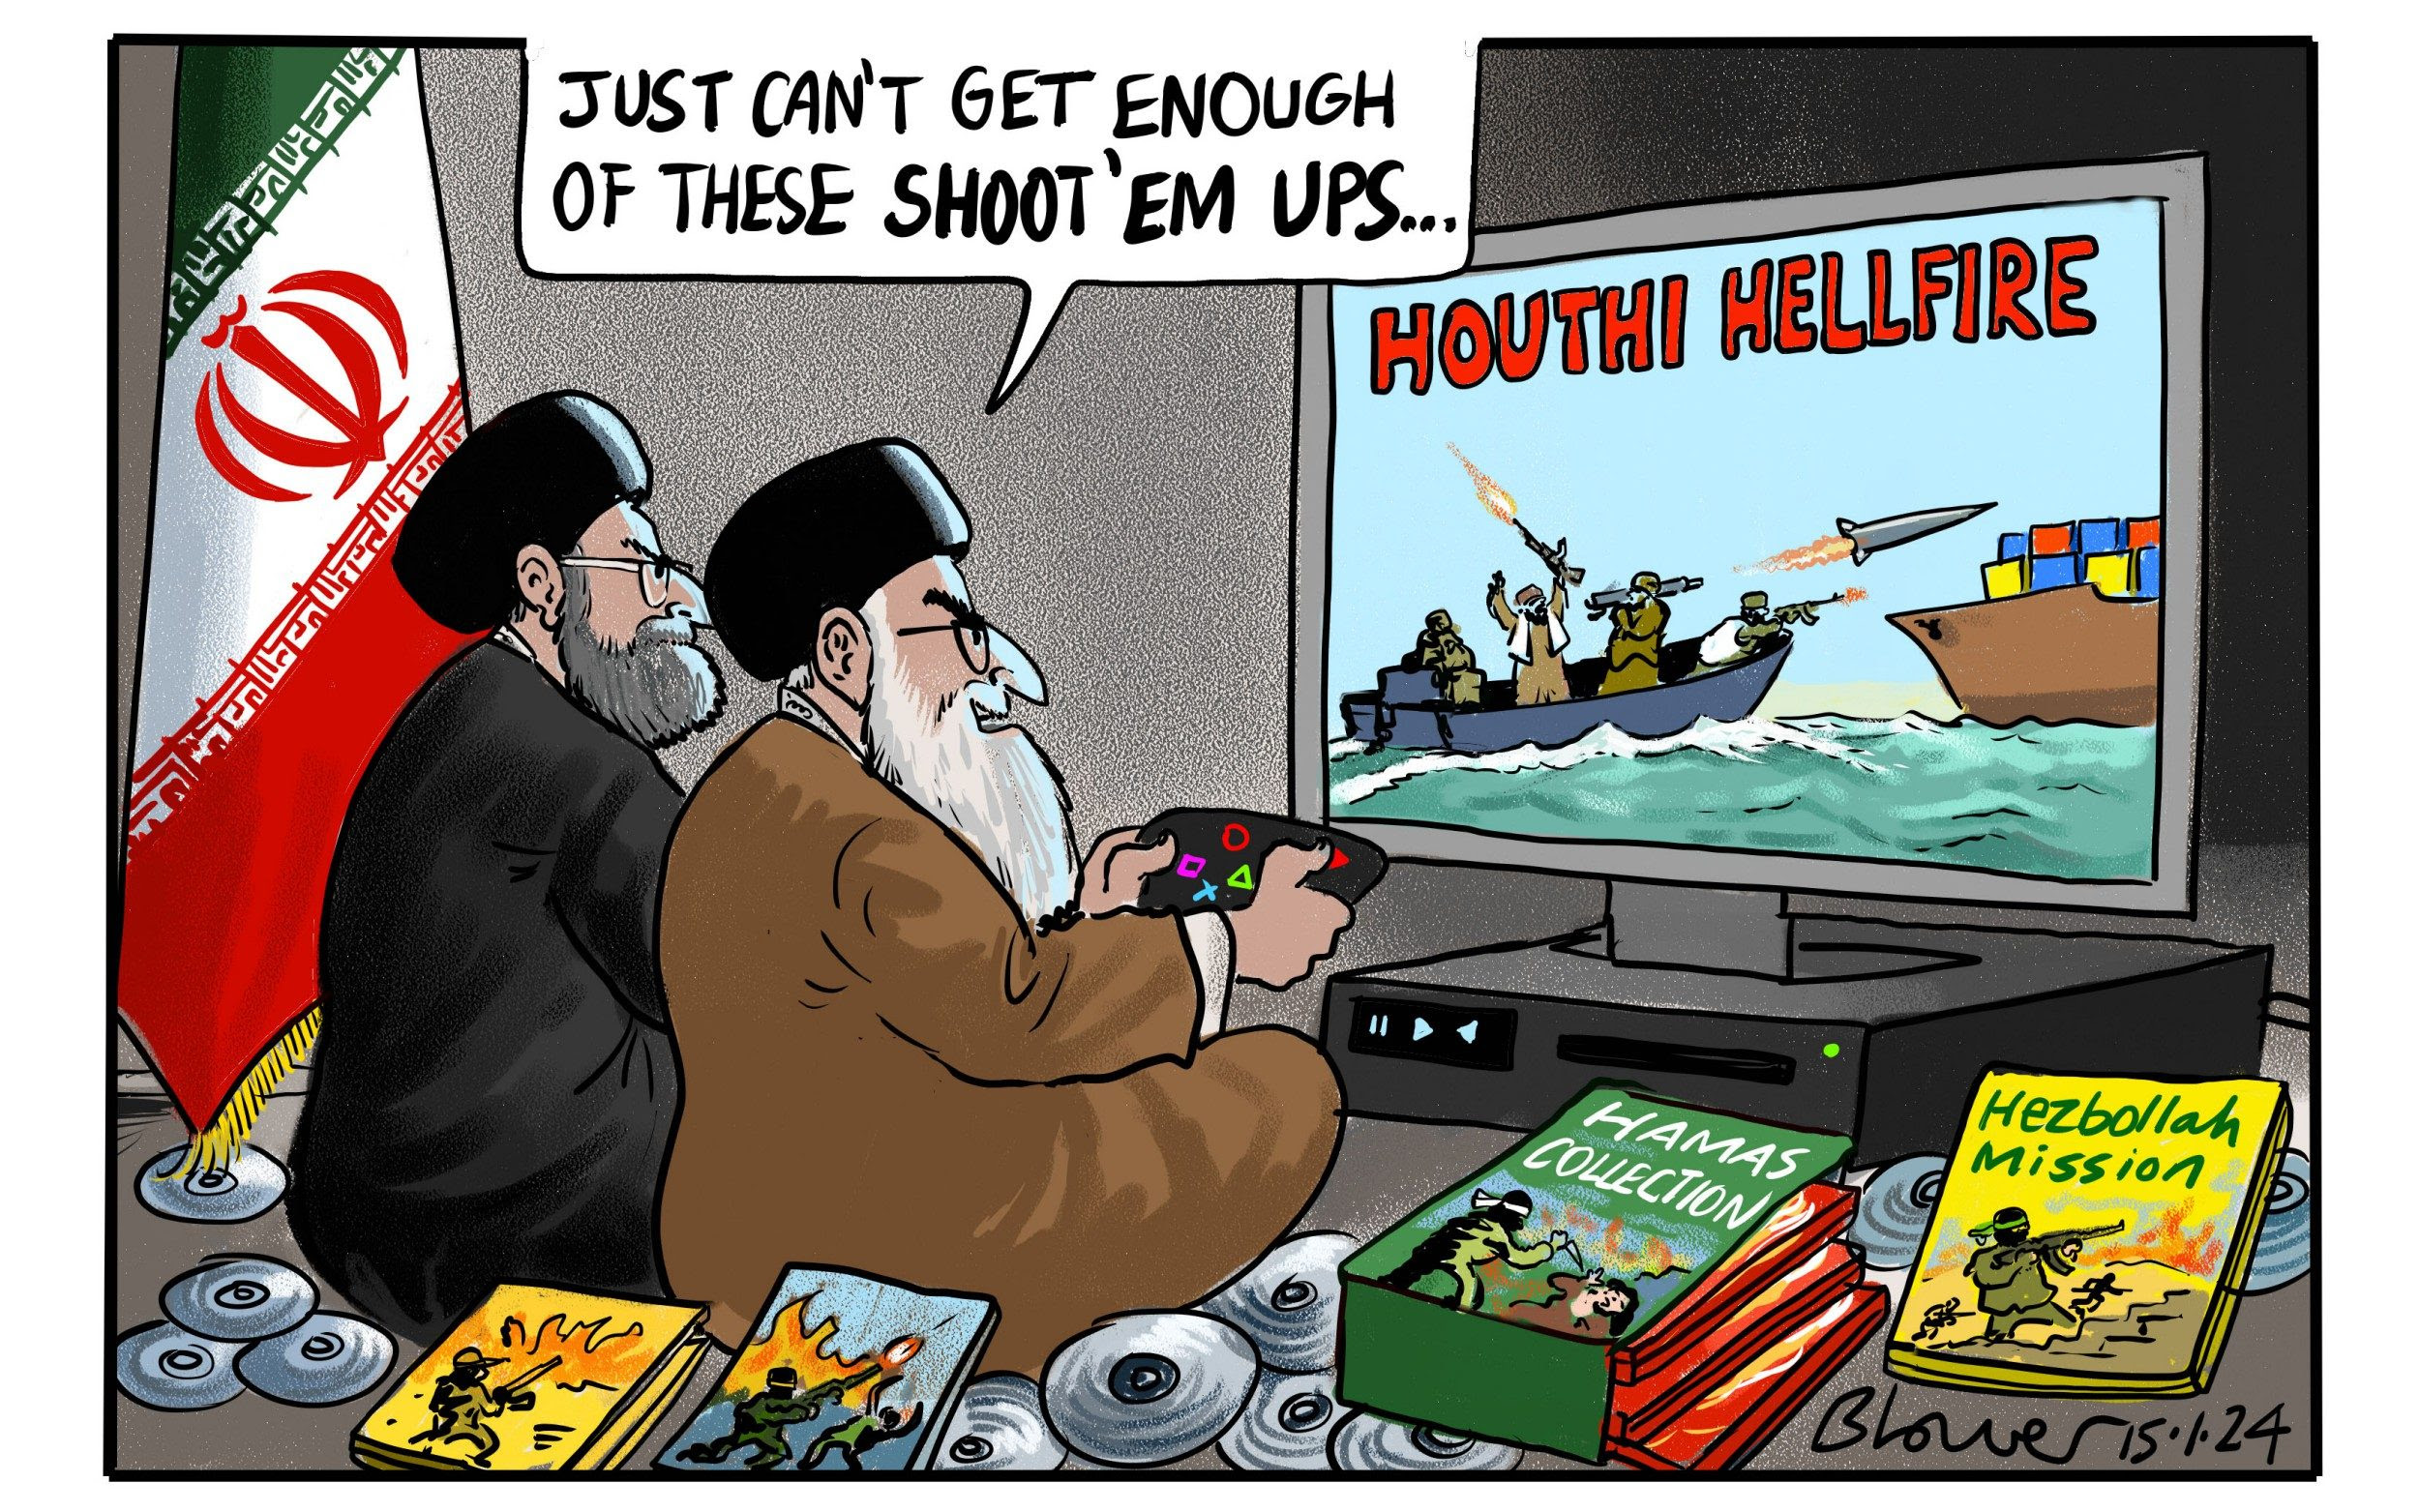 Iranian leaders play Houthi, Hamas and Hezbollah-themed video games.